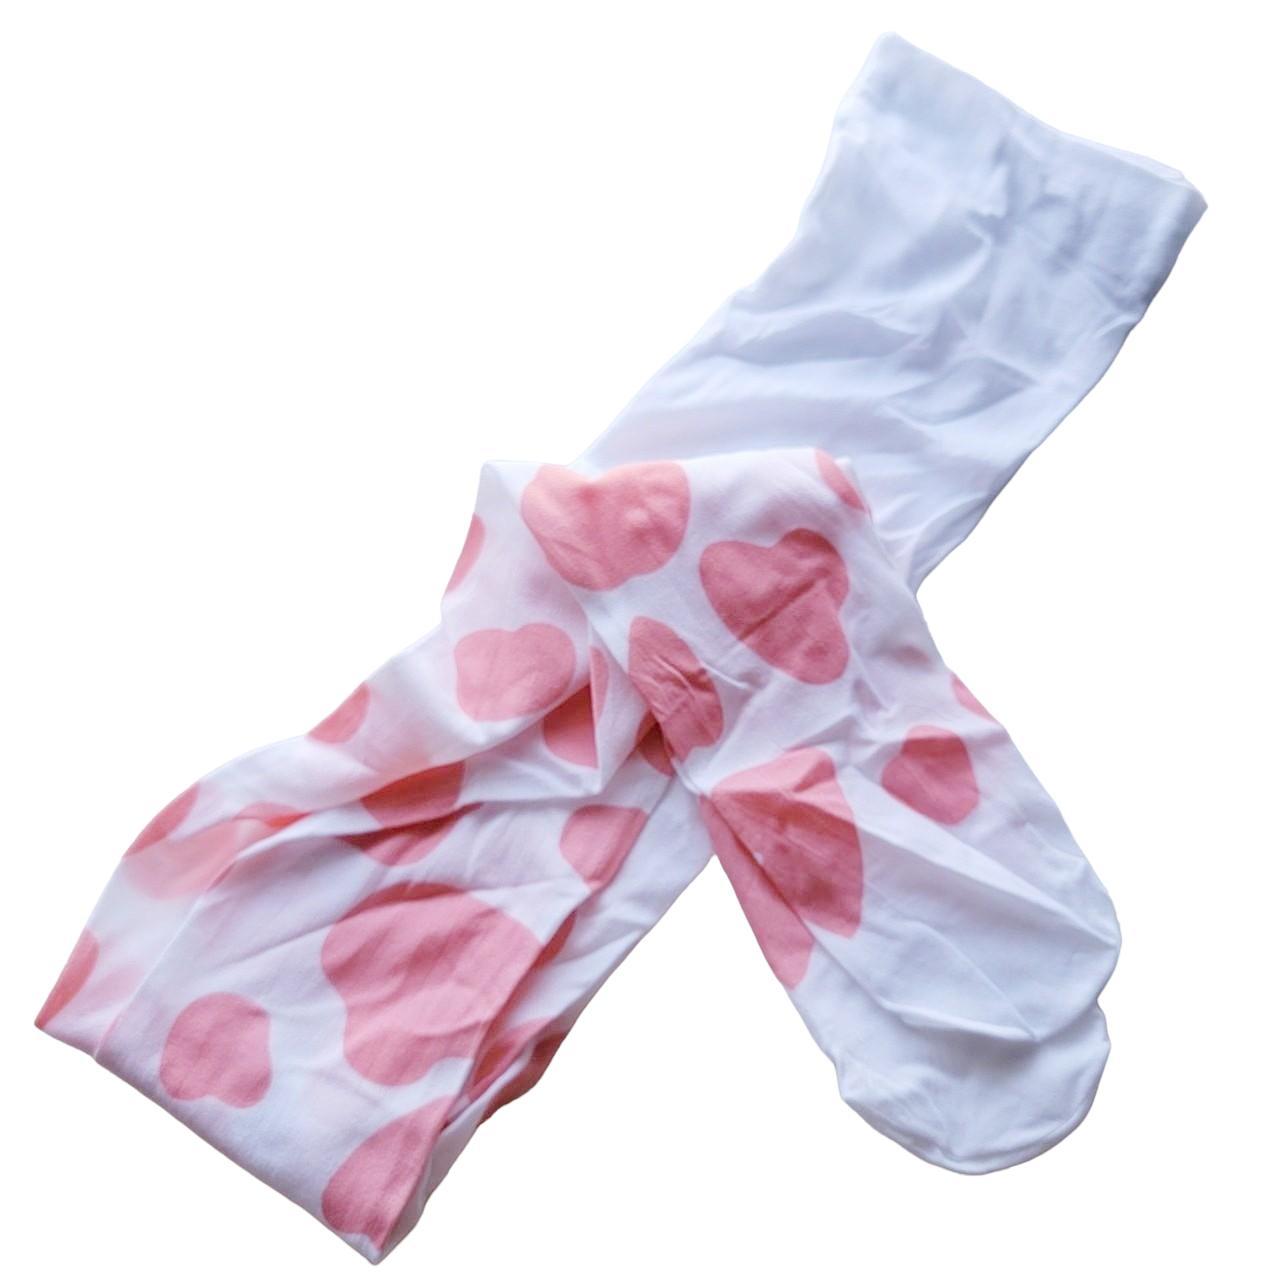 Hot Topic Women's White and Pink Hosiery-tights